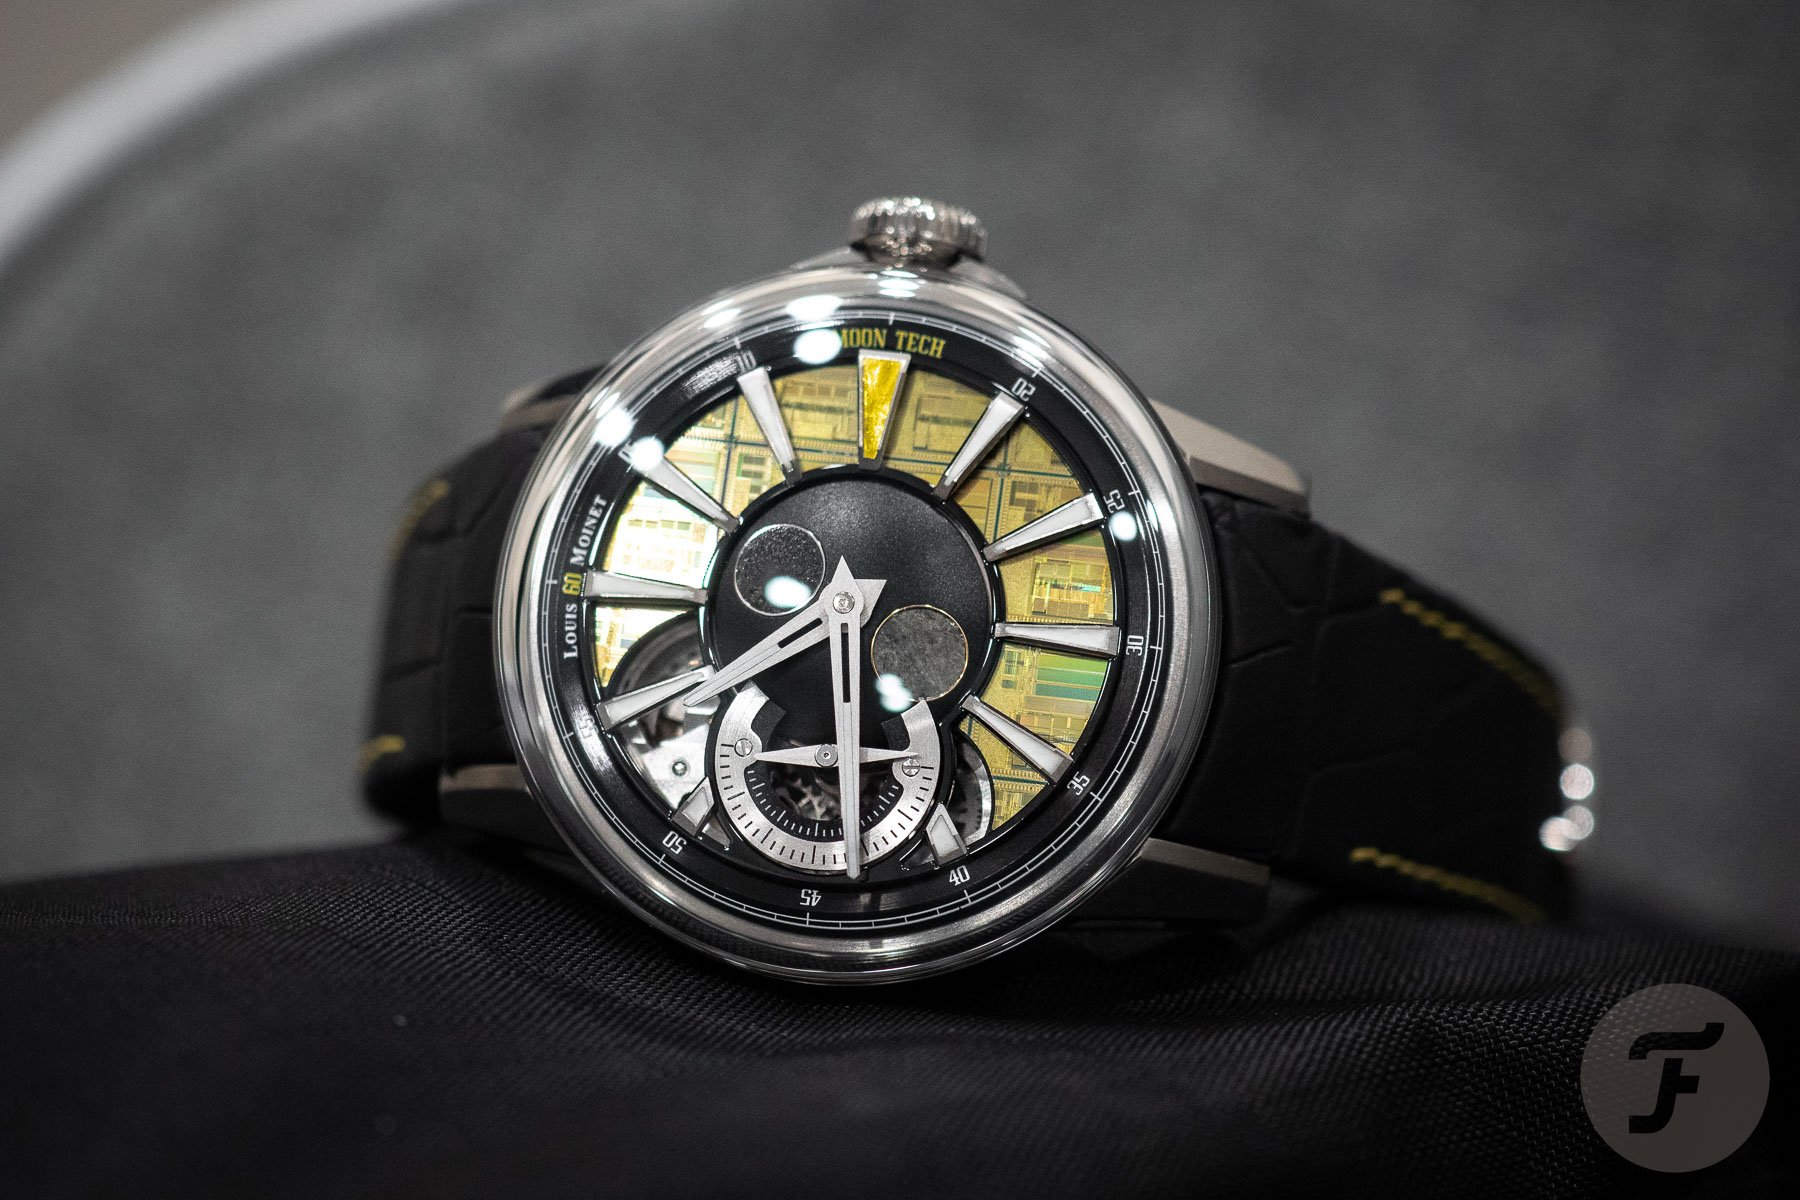 Watches & Wonders 2021: Arnold & Son Goes Mythical With The Dragon & Phoenix